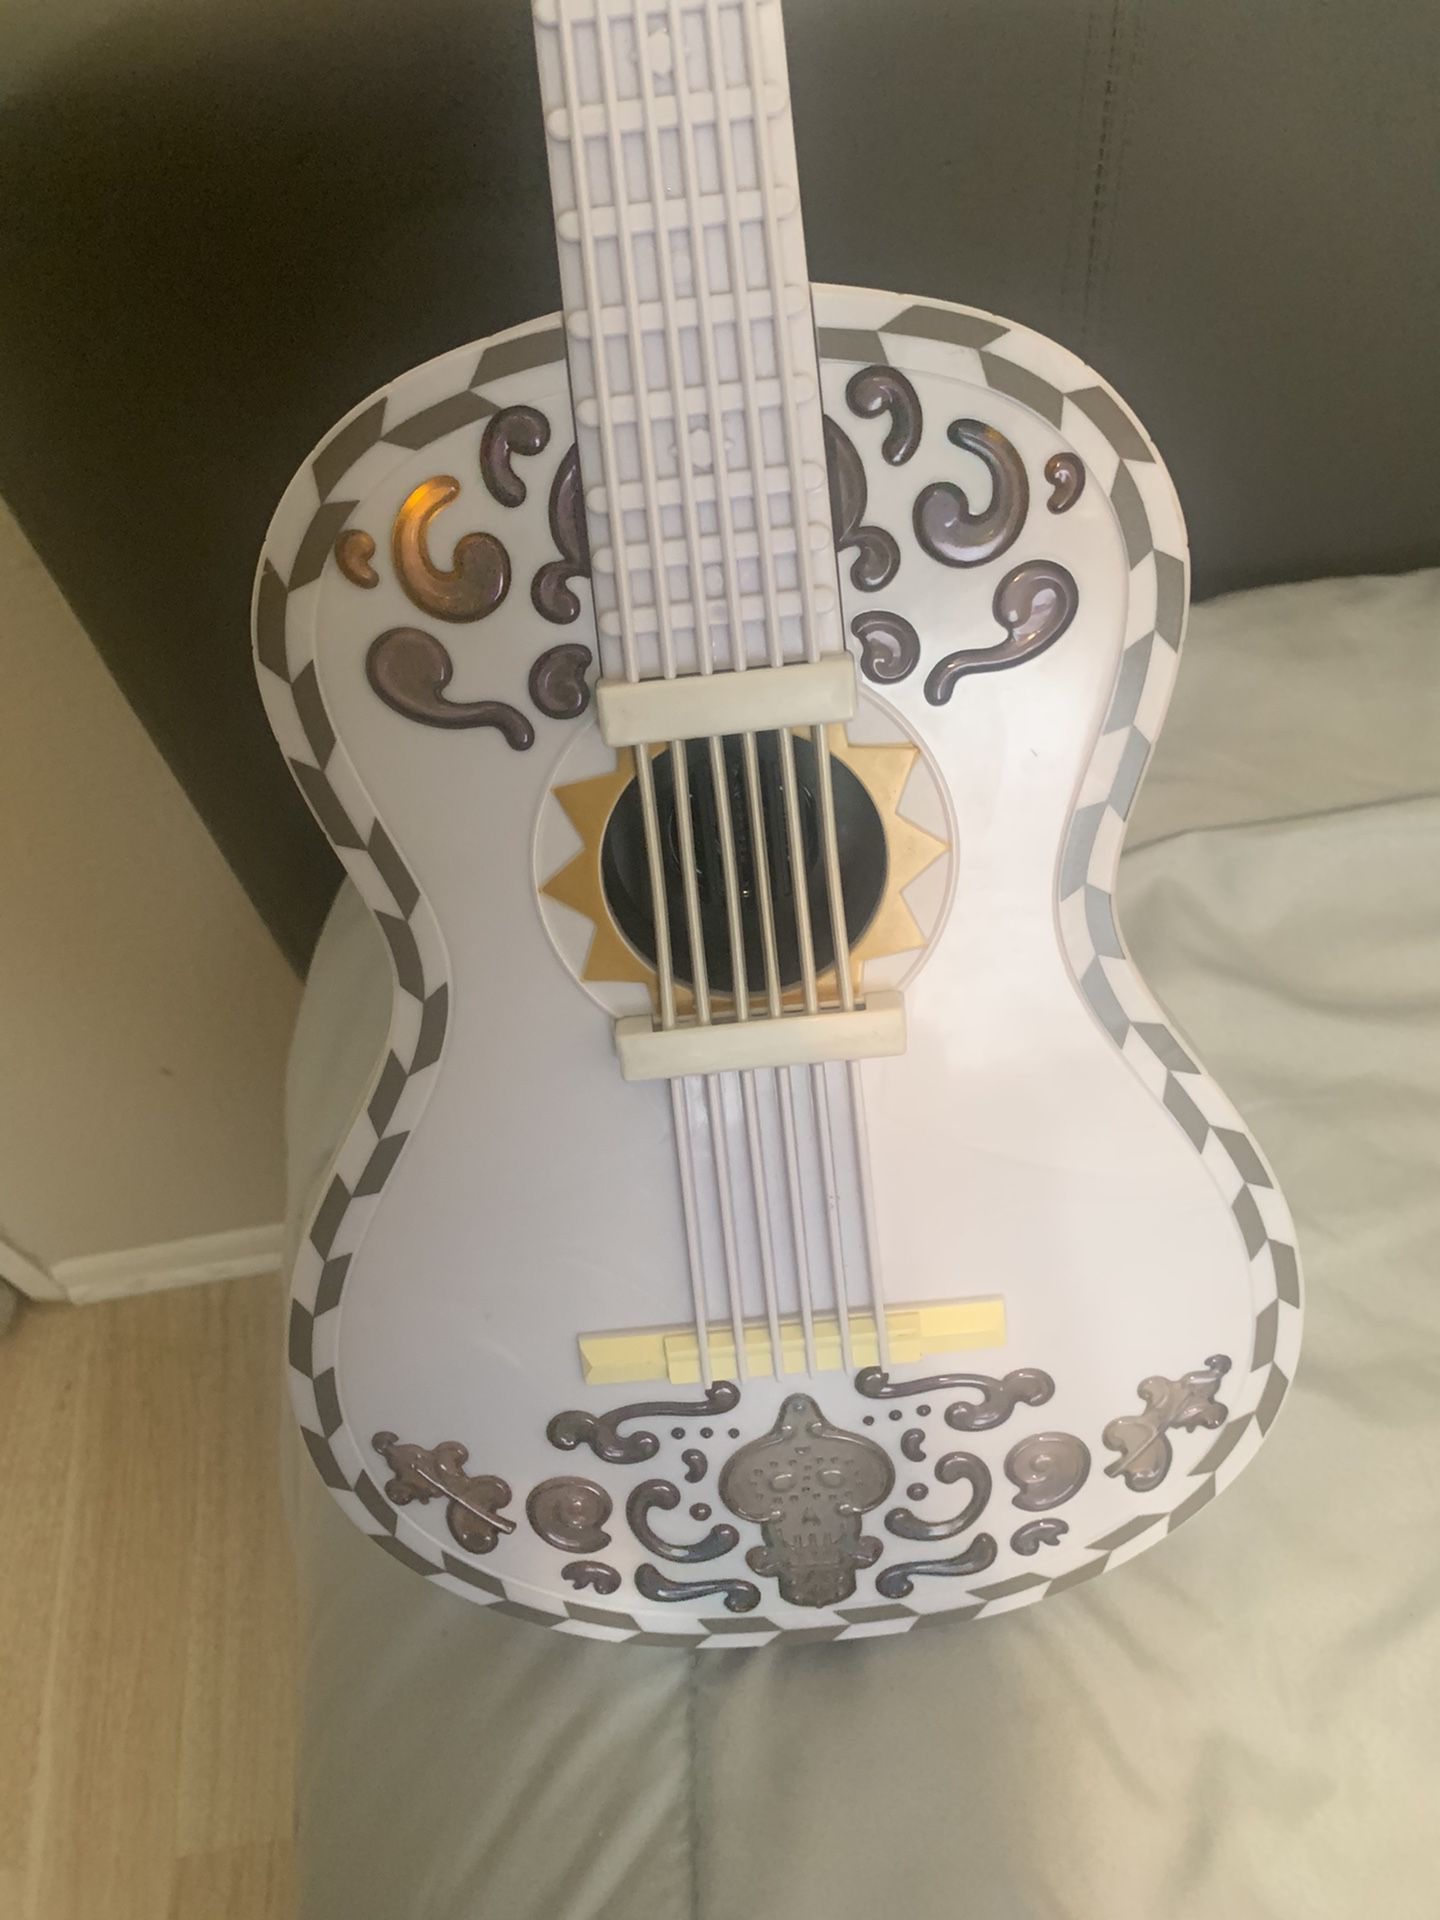 Guitar from movie Coco